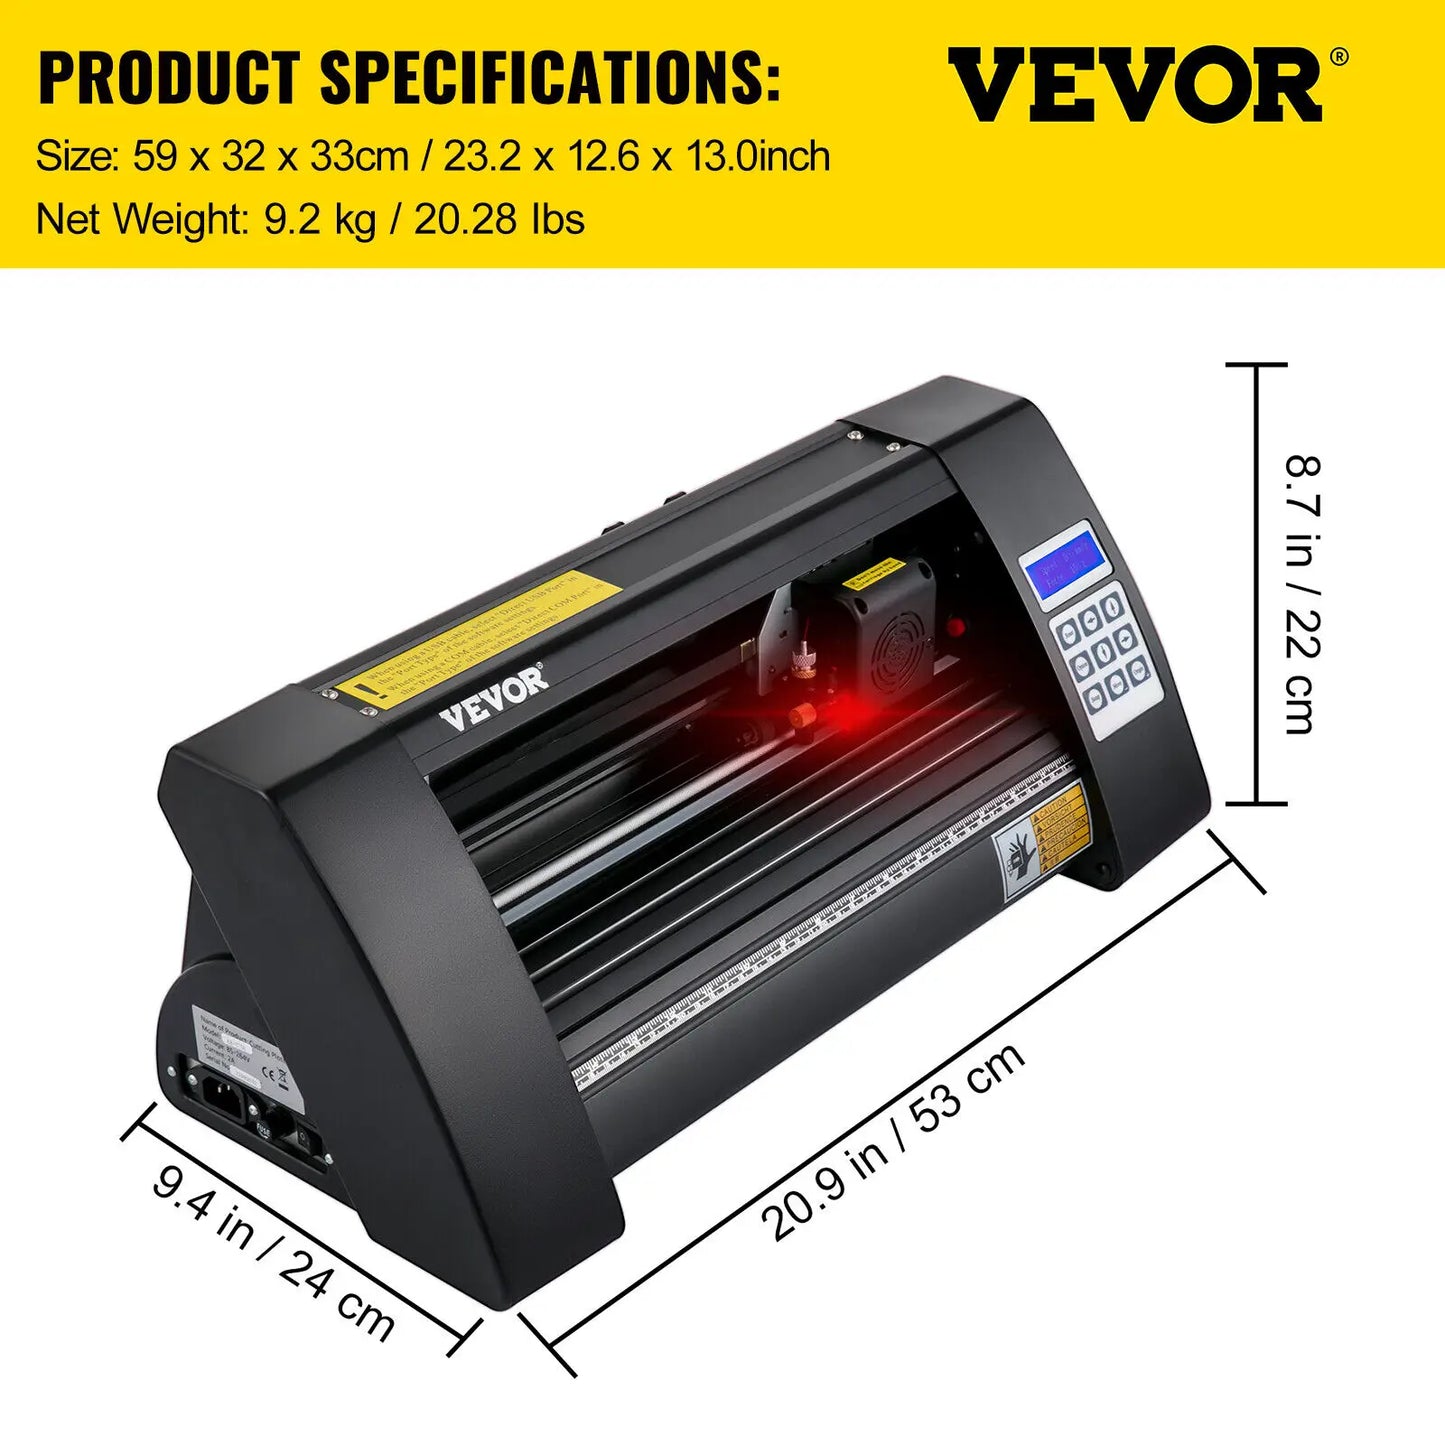 VEVOR 14" Semi-Automatic Vinyl Cutter Plotter 375mm Signmaster Cutting w/ Papers LED Screen Plotter Cutter